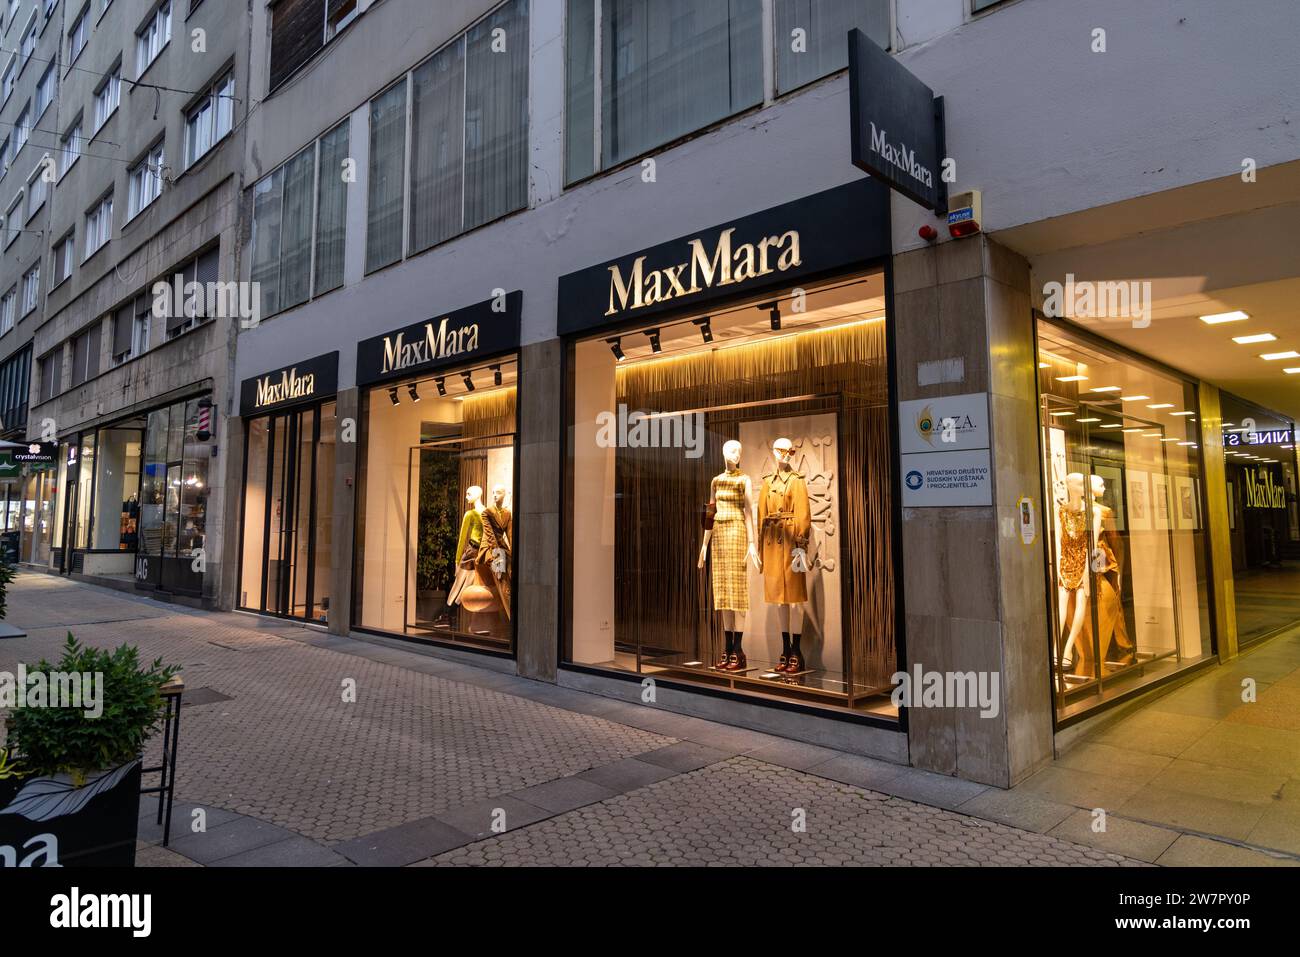 Facade of MaxMara store with lit windows with mannequins Stock Photo